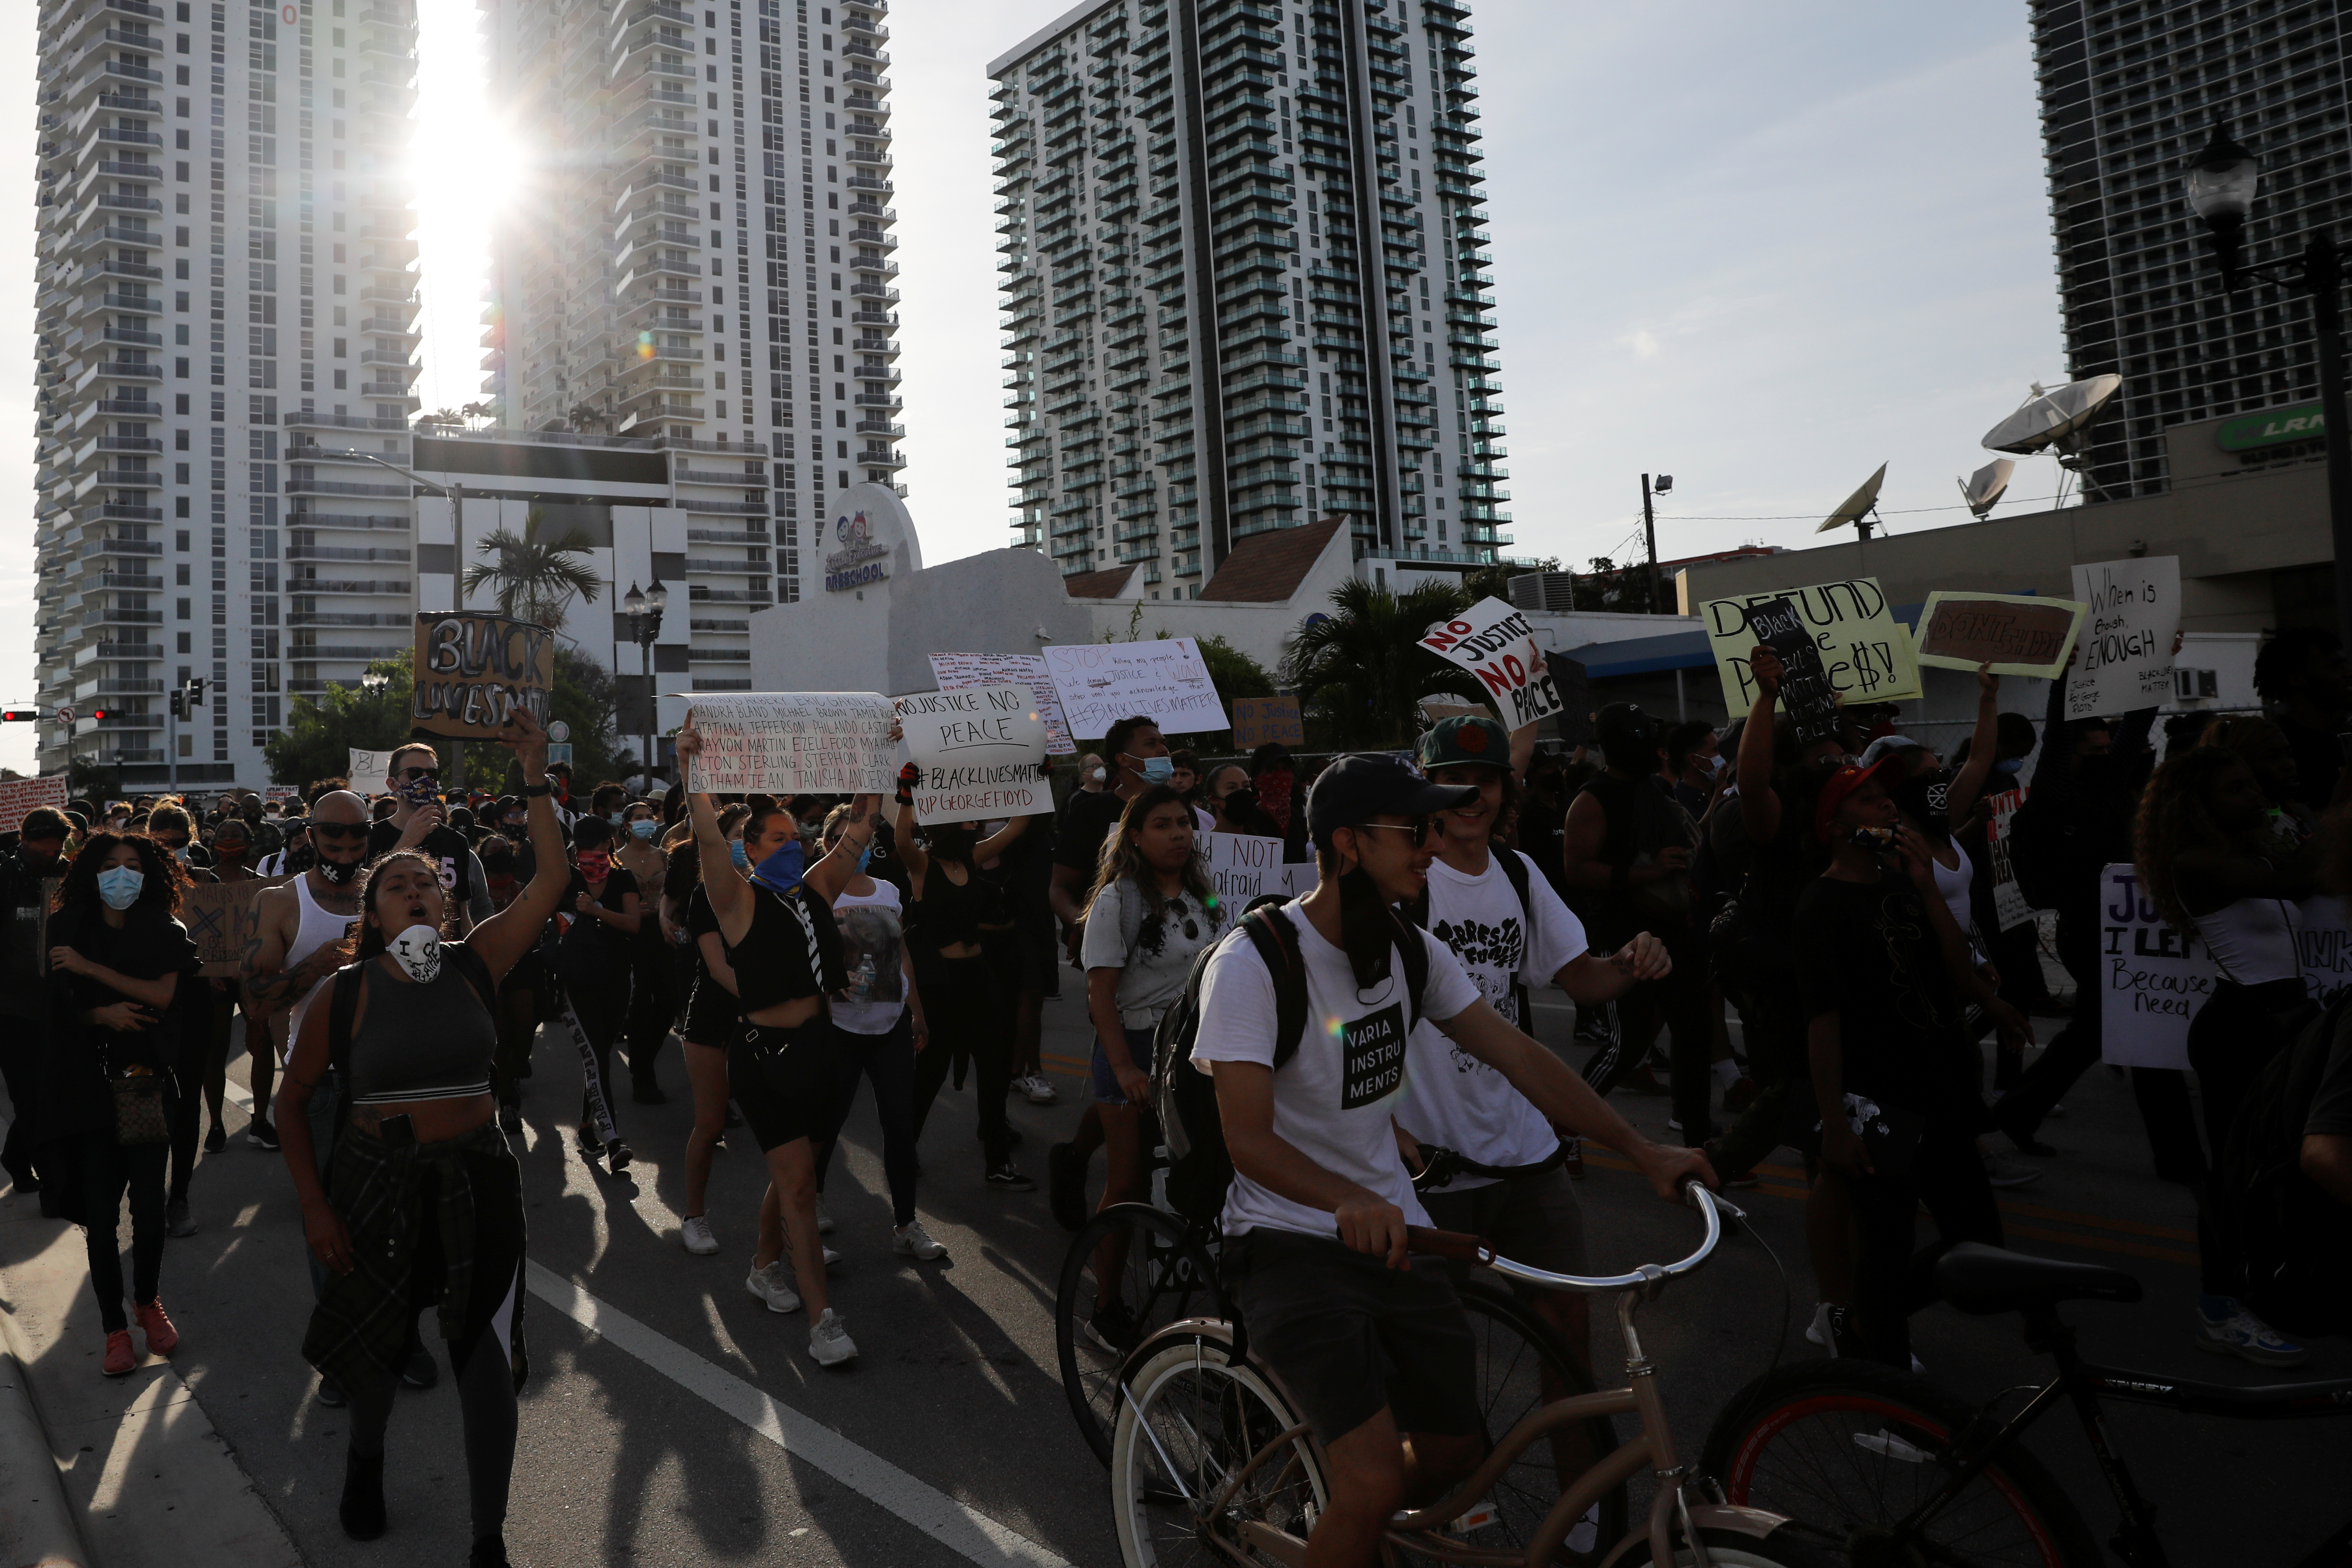 People attend a protest amid nationwide unrest following the death in Minneapolis police custody of George Floyd, in Miami, Florida, U.S., May 31, 2020. REUTERS/Marco Bello